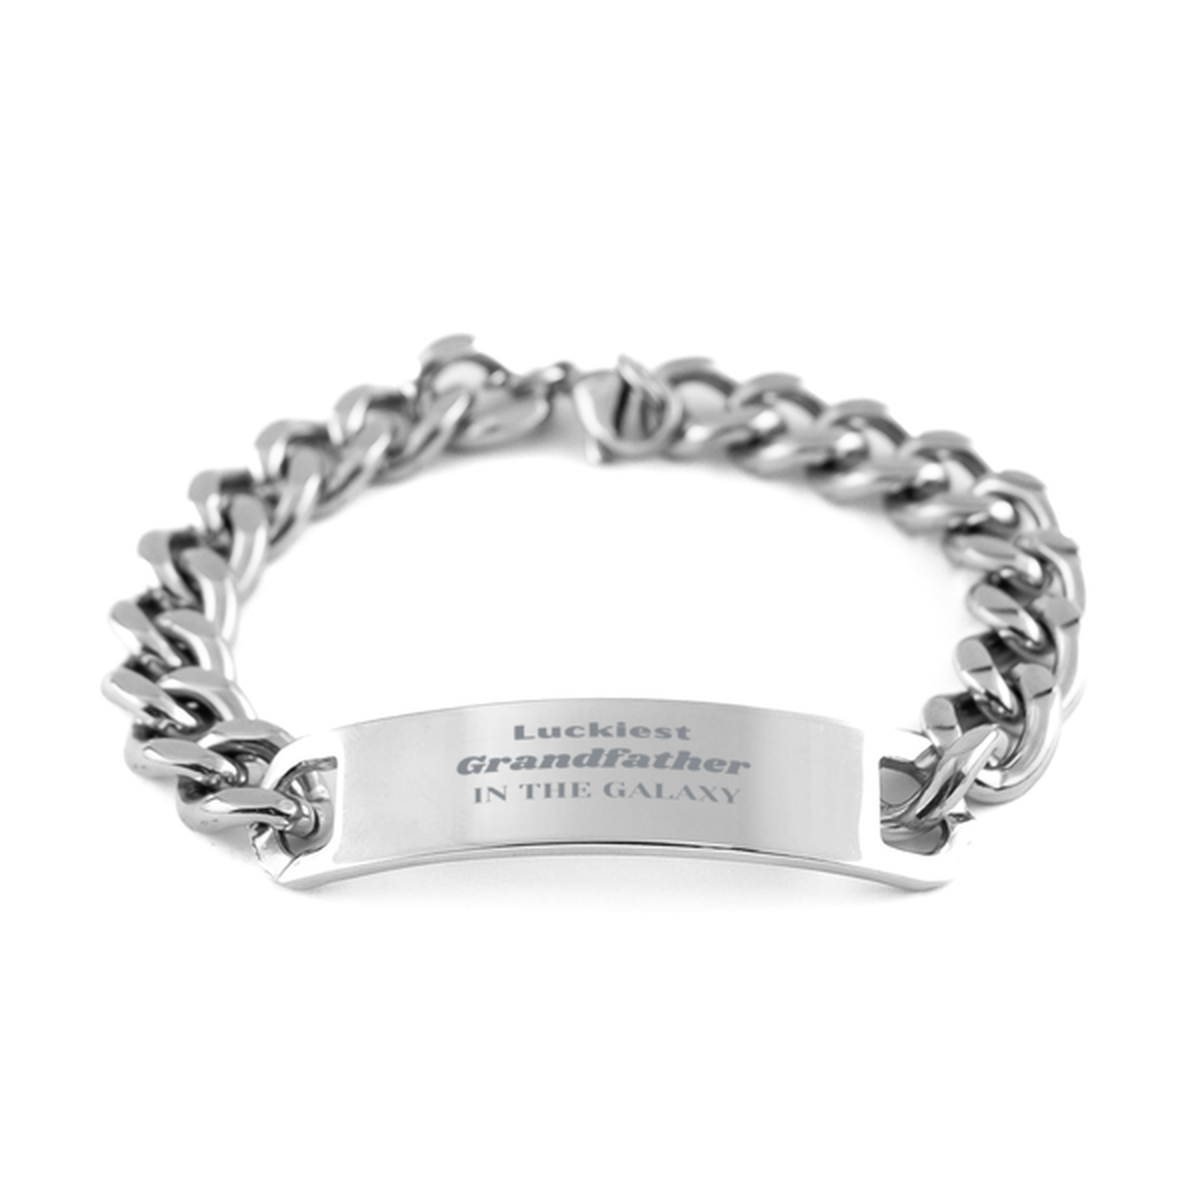 Luckiest Grandfather in the Galaxy, To My Grandfather Engraved Gifts, Christmas Grandfather Cuban Chain Stainless Steel Bracelet Gifts, X-mas Birthday Unique Gifts For Grandfather Men Women